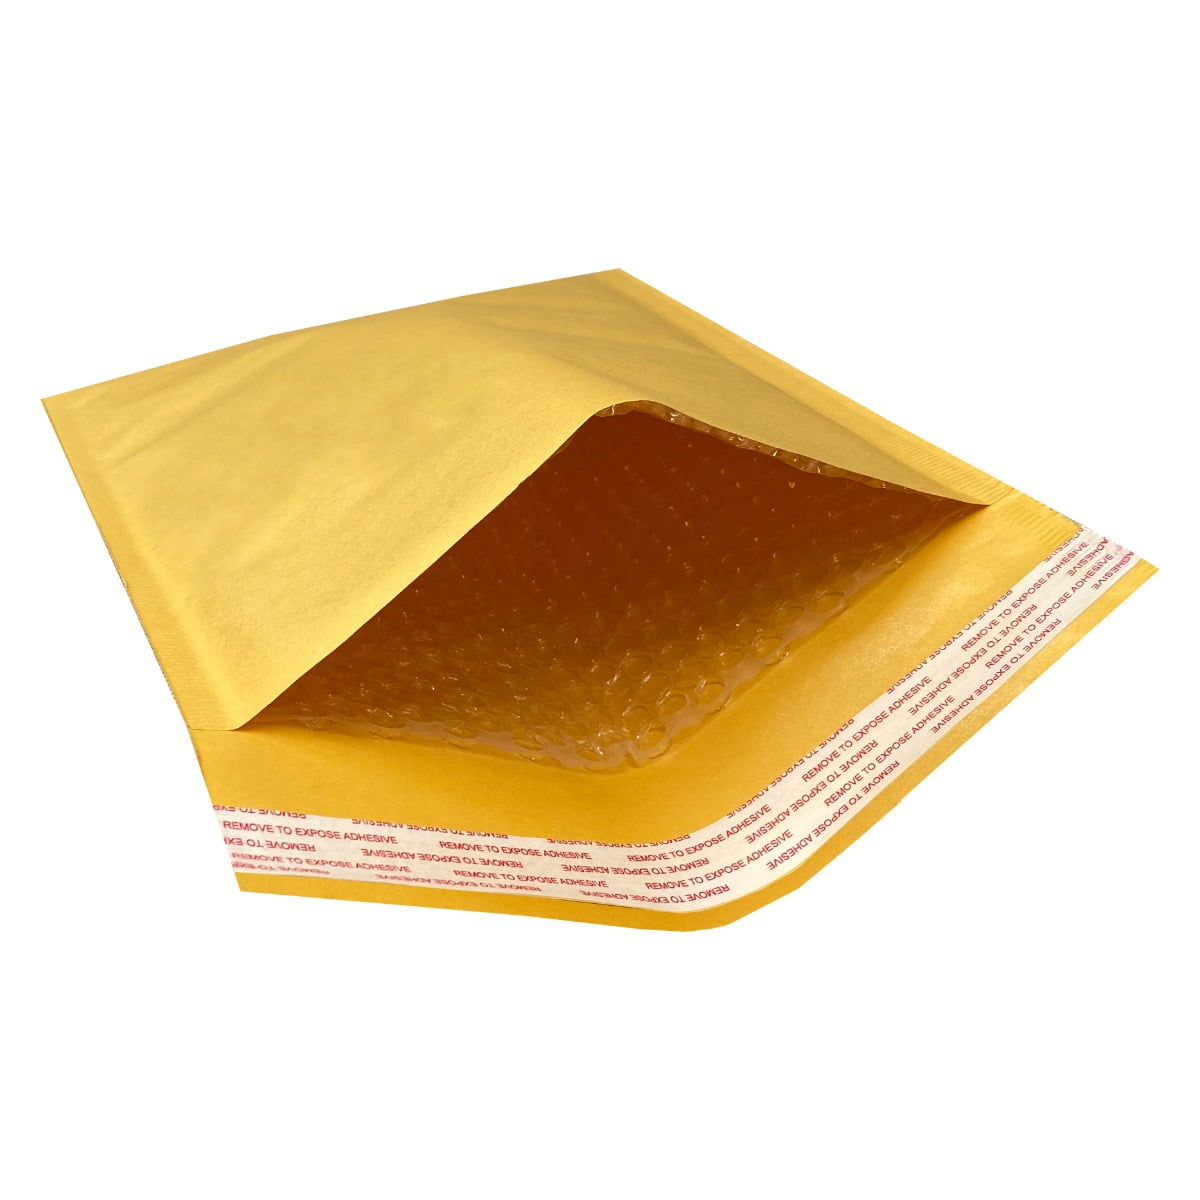 Details about   Pack of 50 Kraft Bubble Wrap Mailers Padded Mailing Envelope Bags 4x8 Inches New 